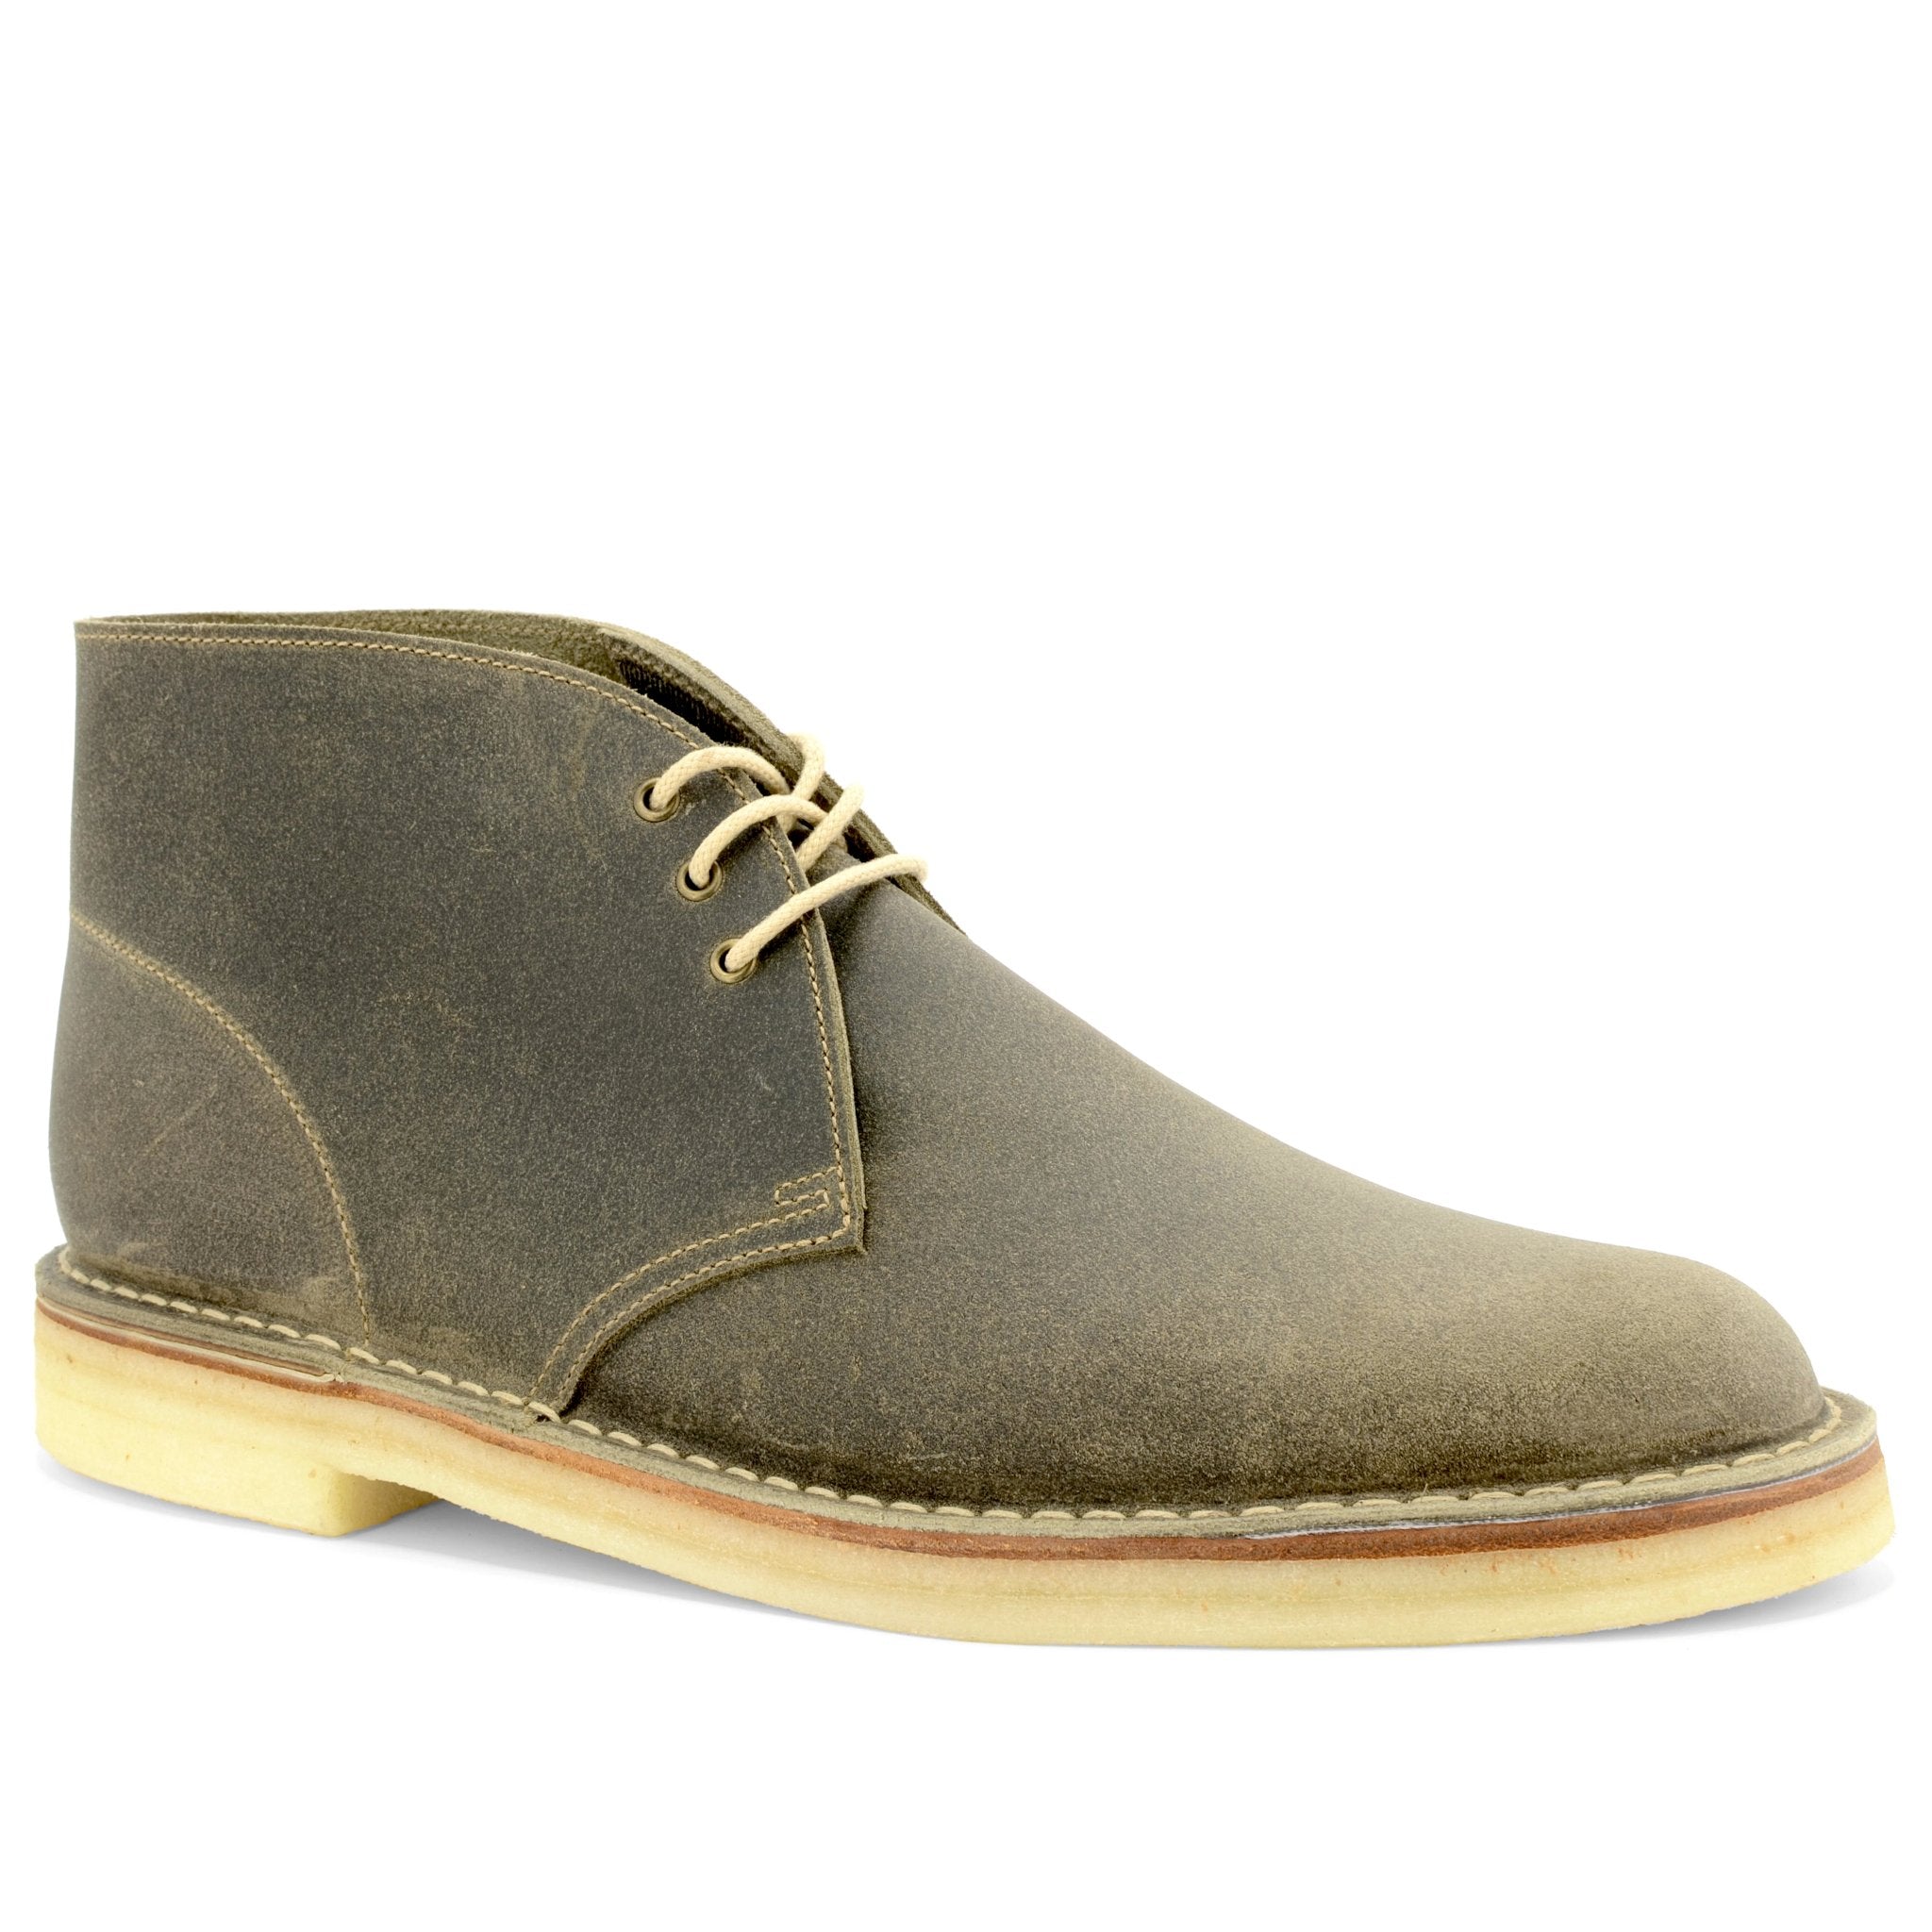 Desert Boot Waxy Leather - Made in 